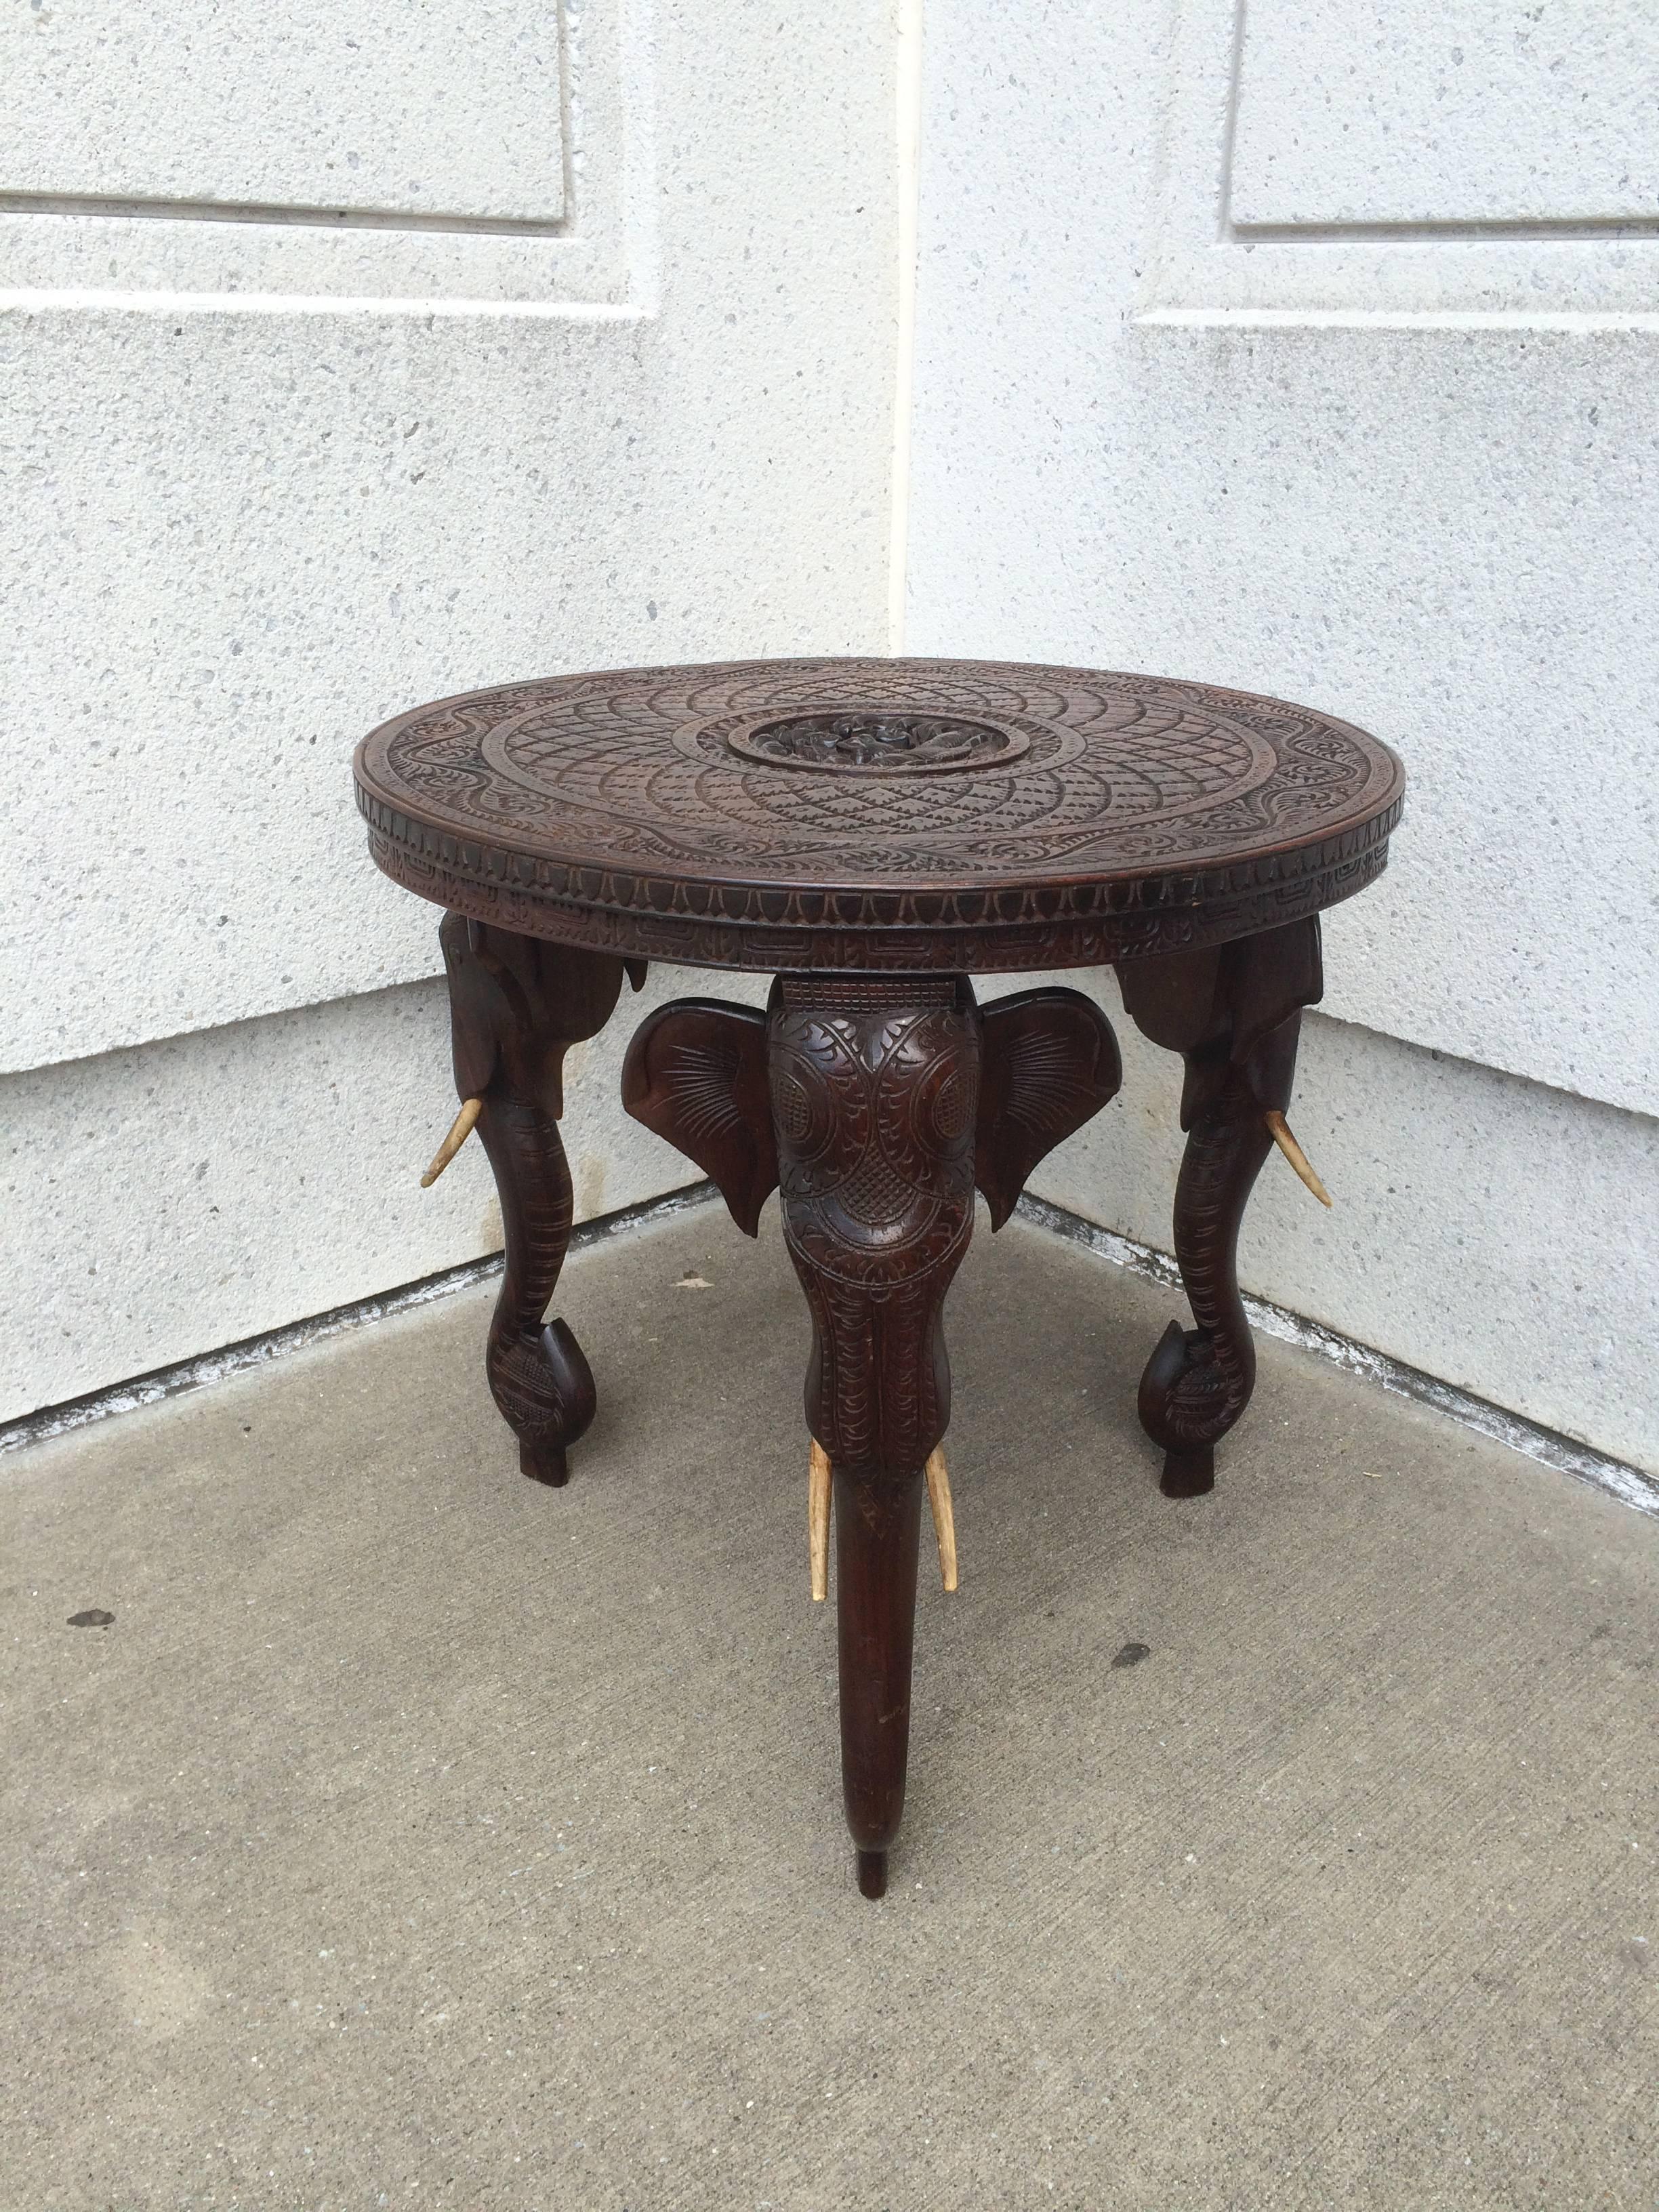 Intricately carved Anglo Indian rosewood side table with three elephant head supports, each shown holding a perfume bottle in the curve of the trunk, all with faux tusks. The center medallion of the top showing a Hindu Goddess seated in lotus